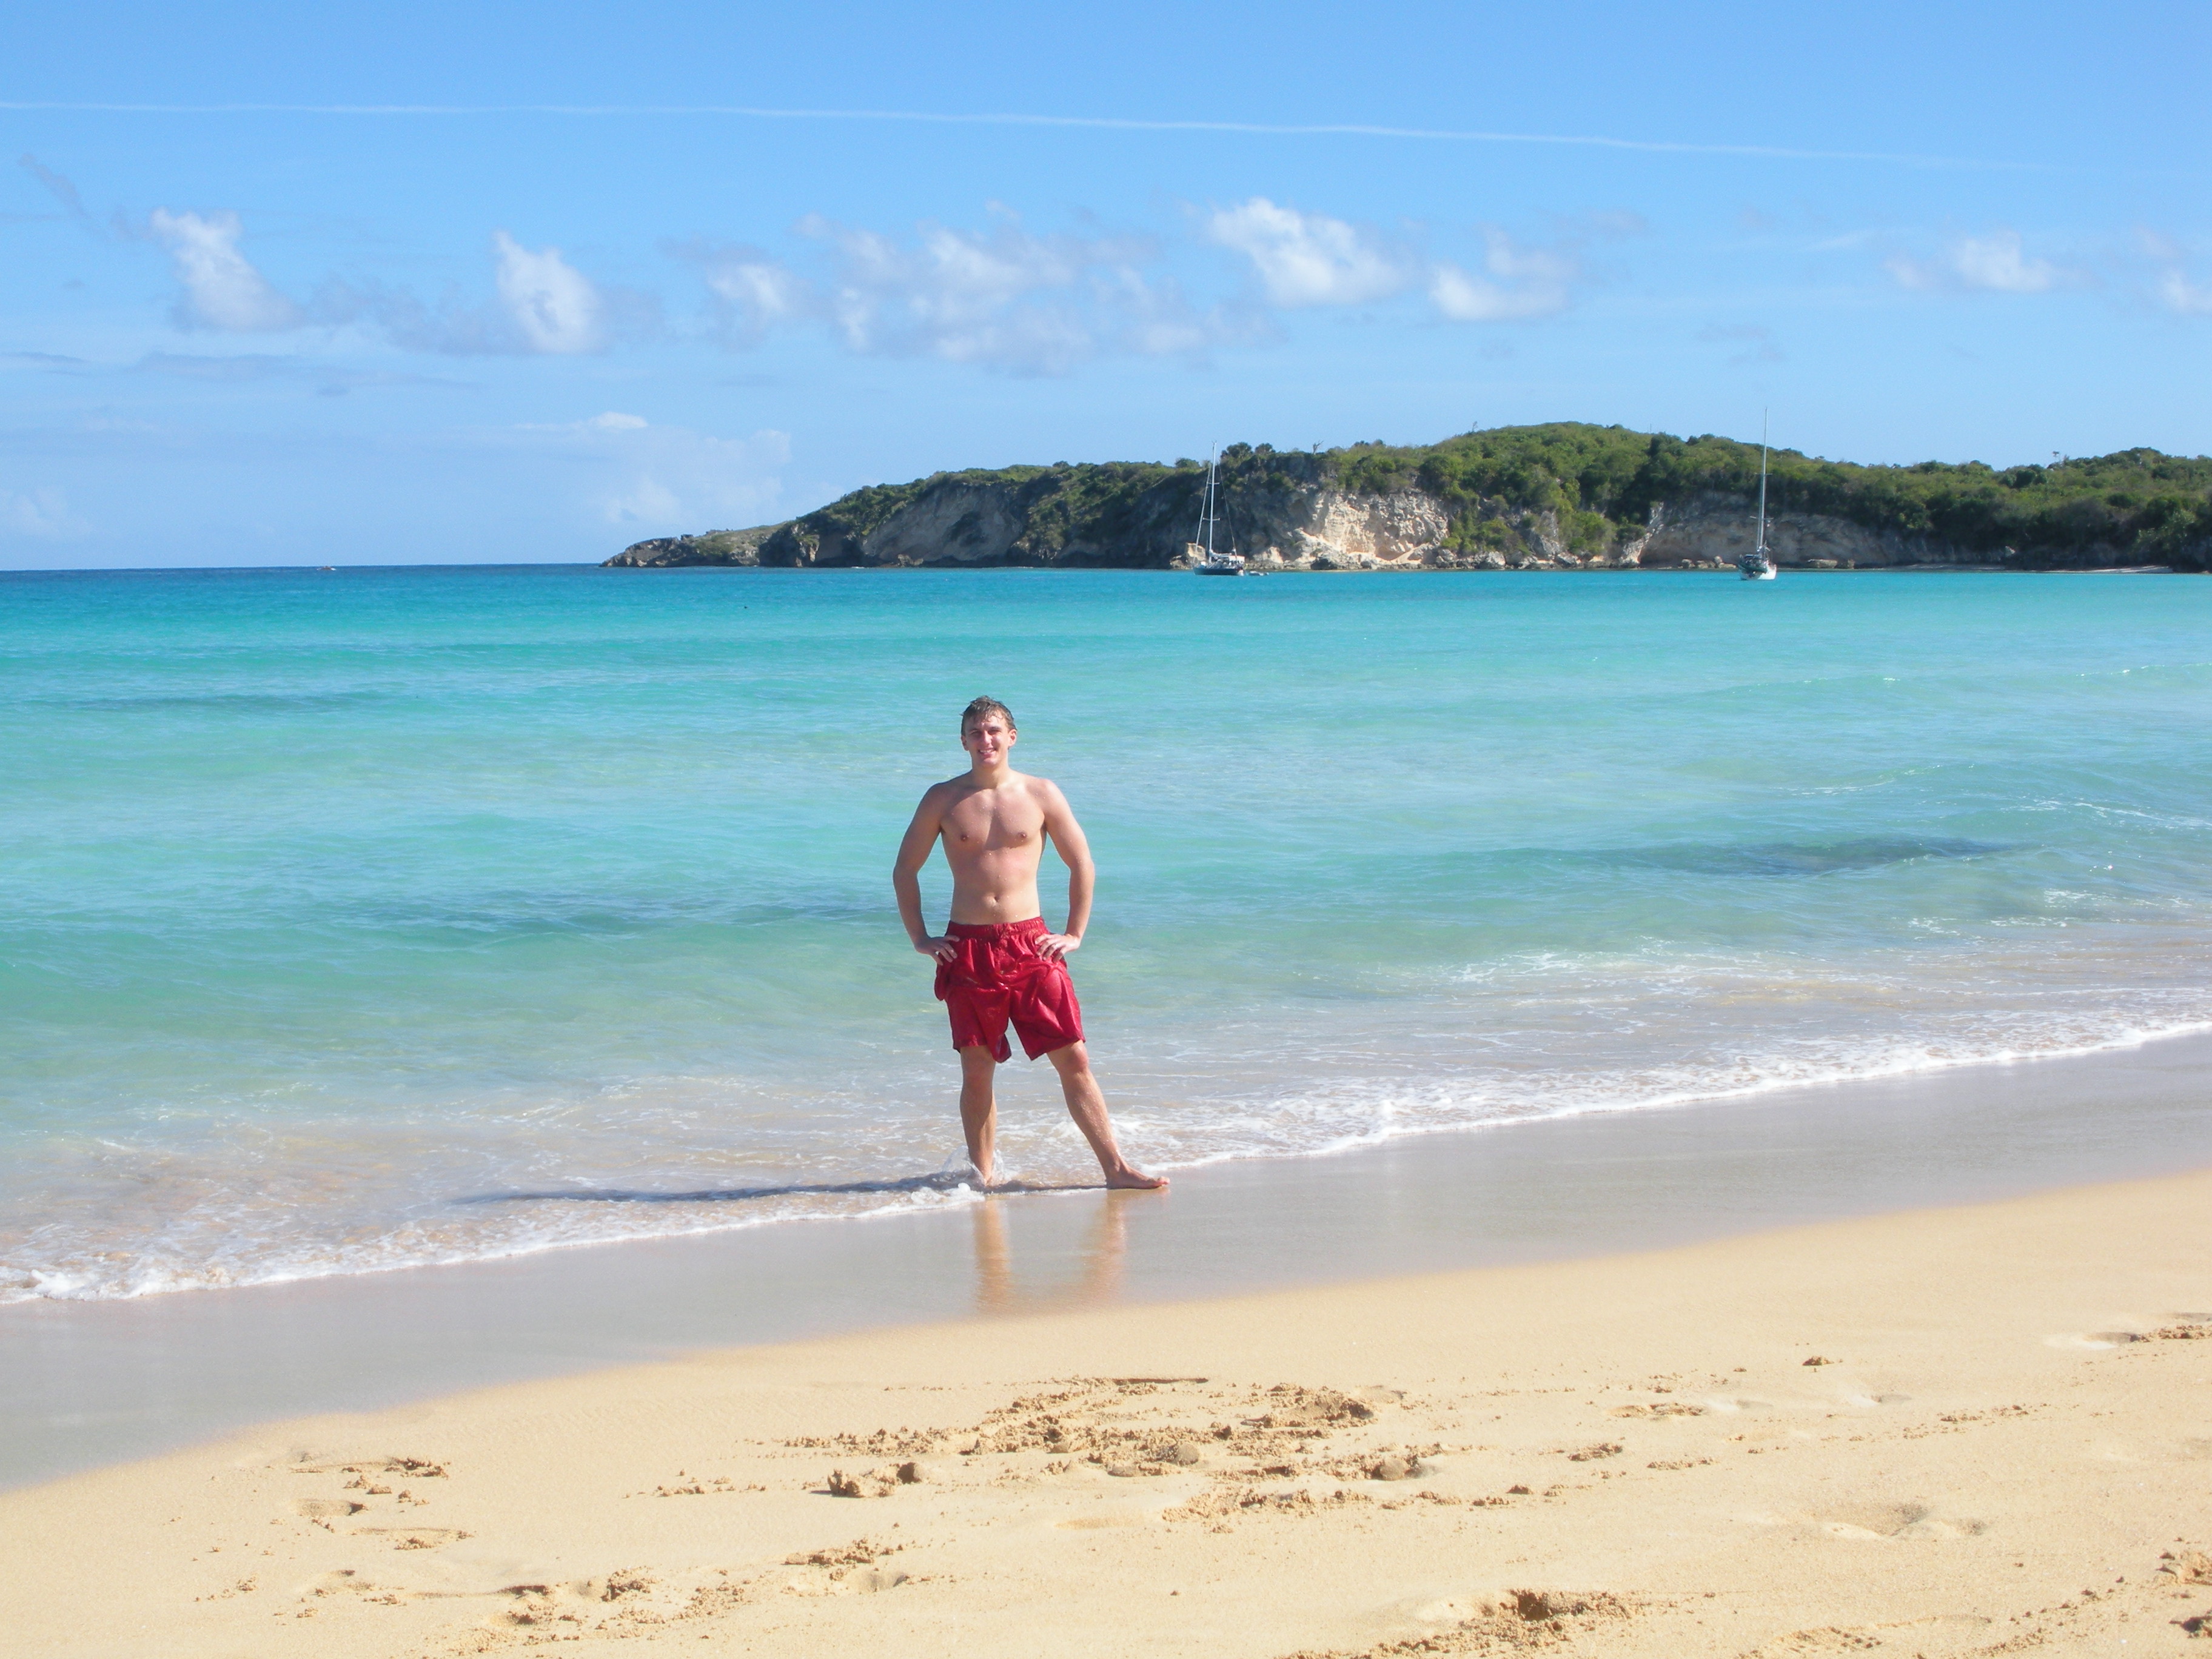 Me in the Dominican Republic on Macow beach!!